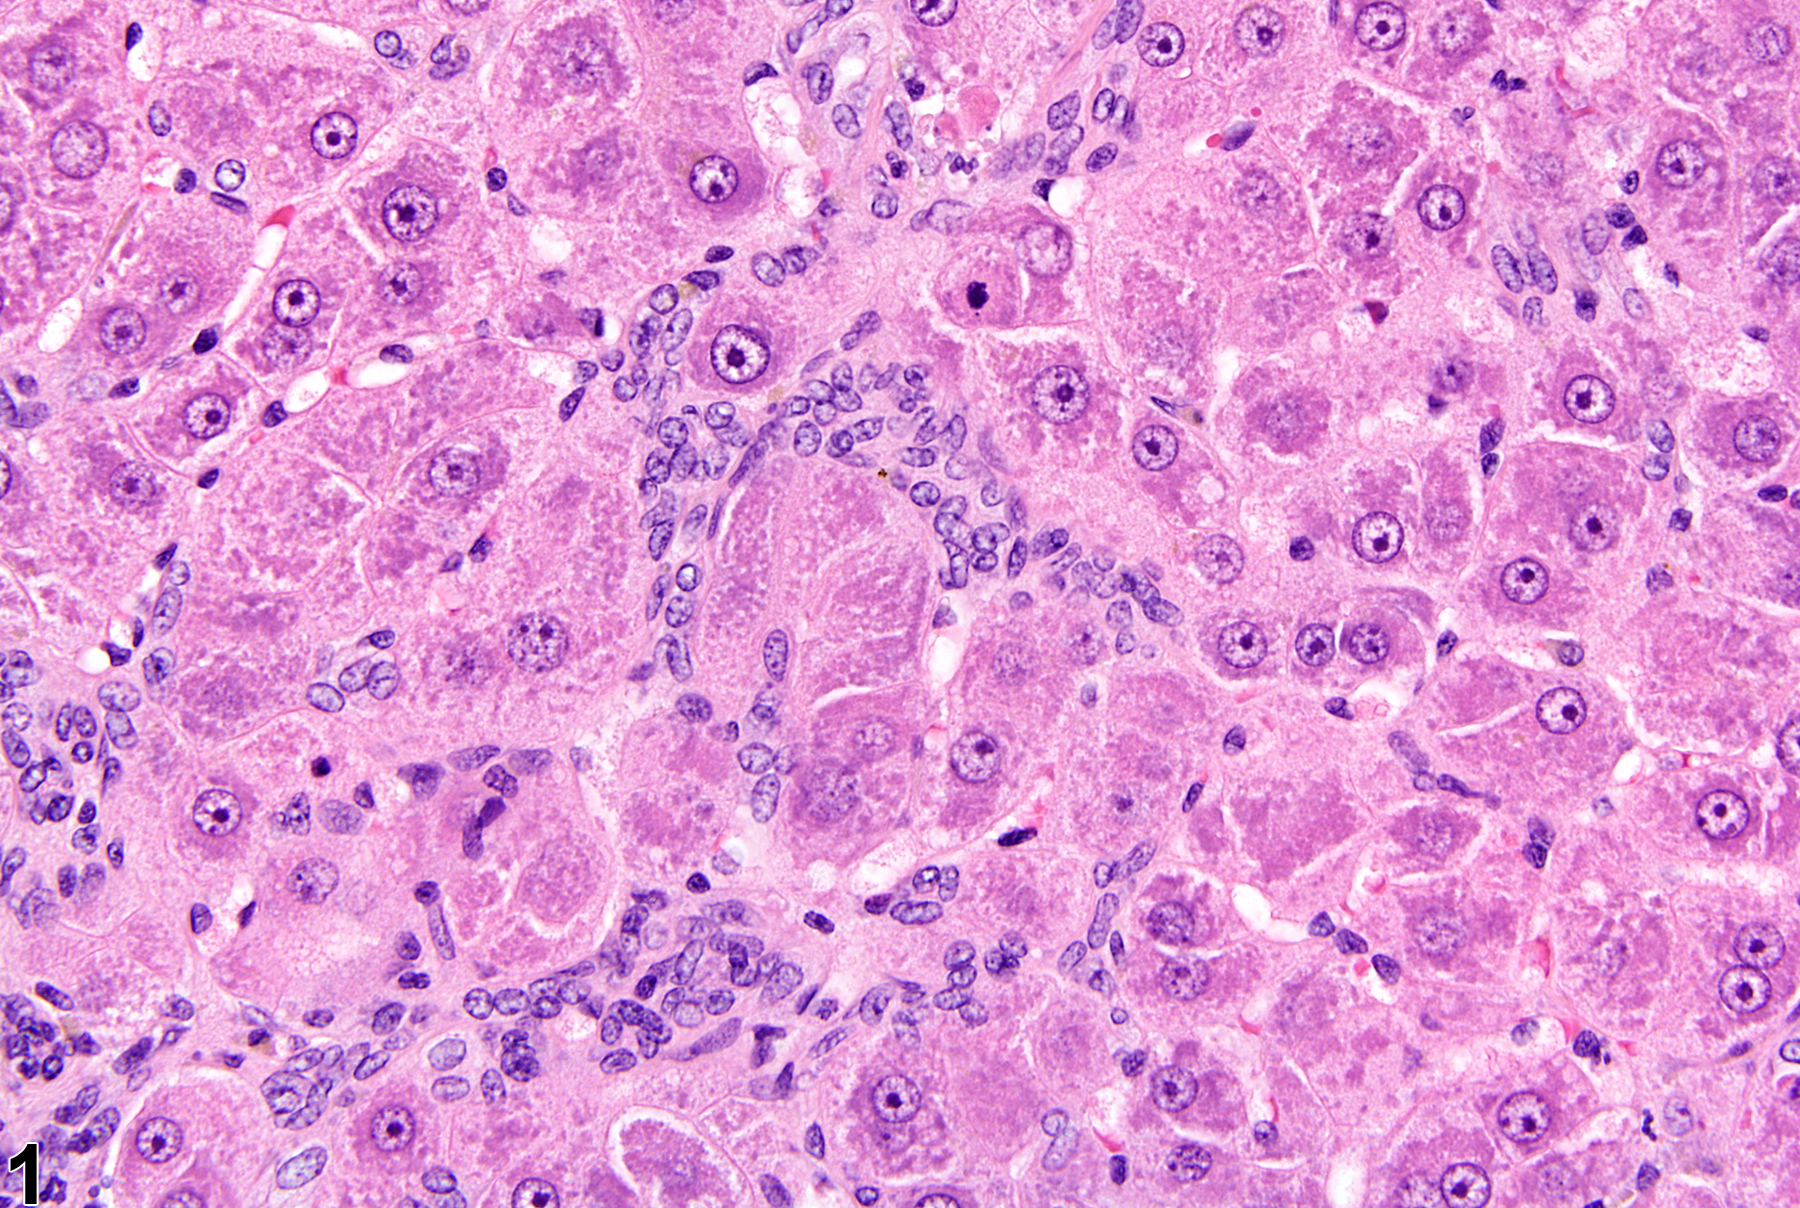 Image of hyperplasia in the liver from a female Harlan Sprague-Dawley rat in a chronic study